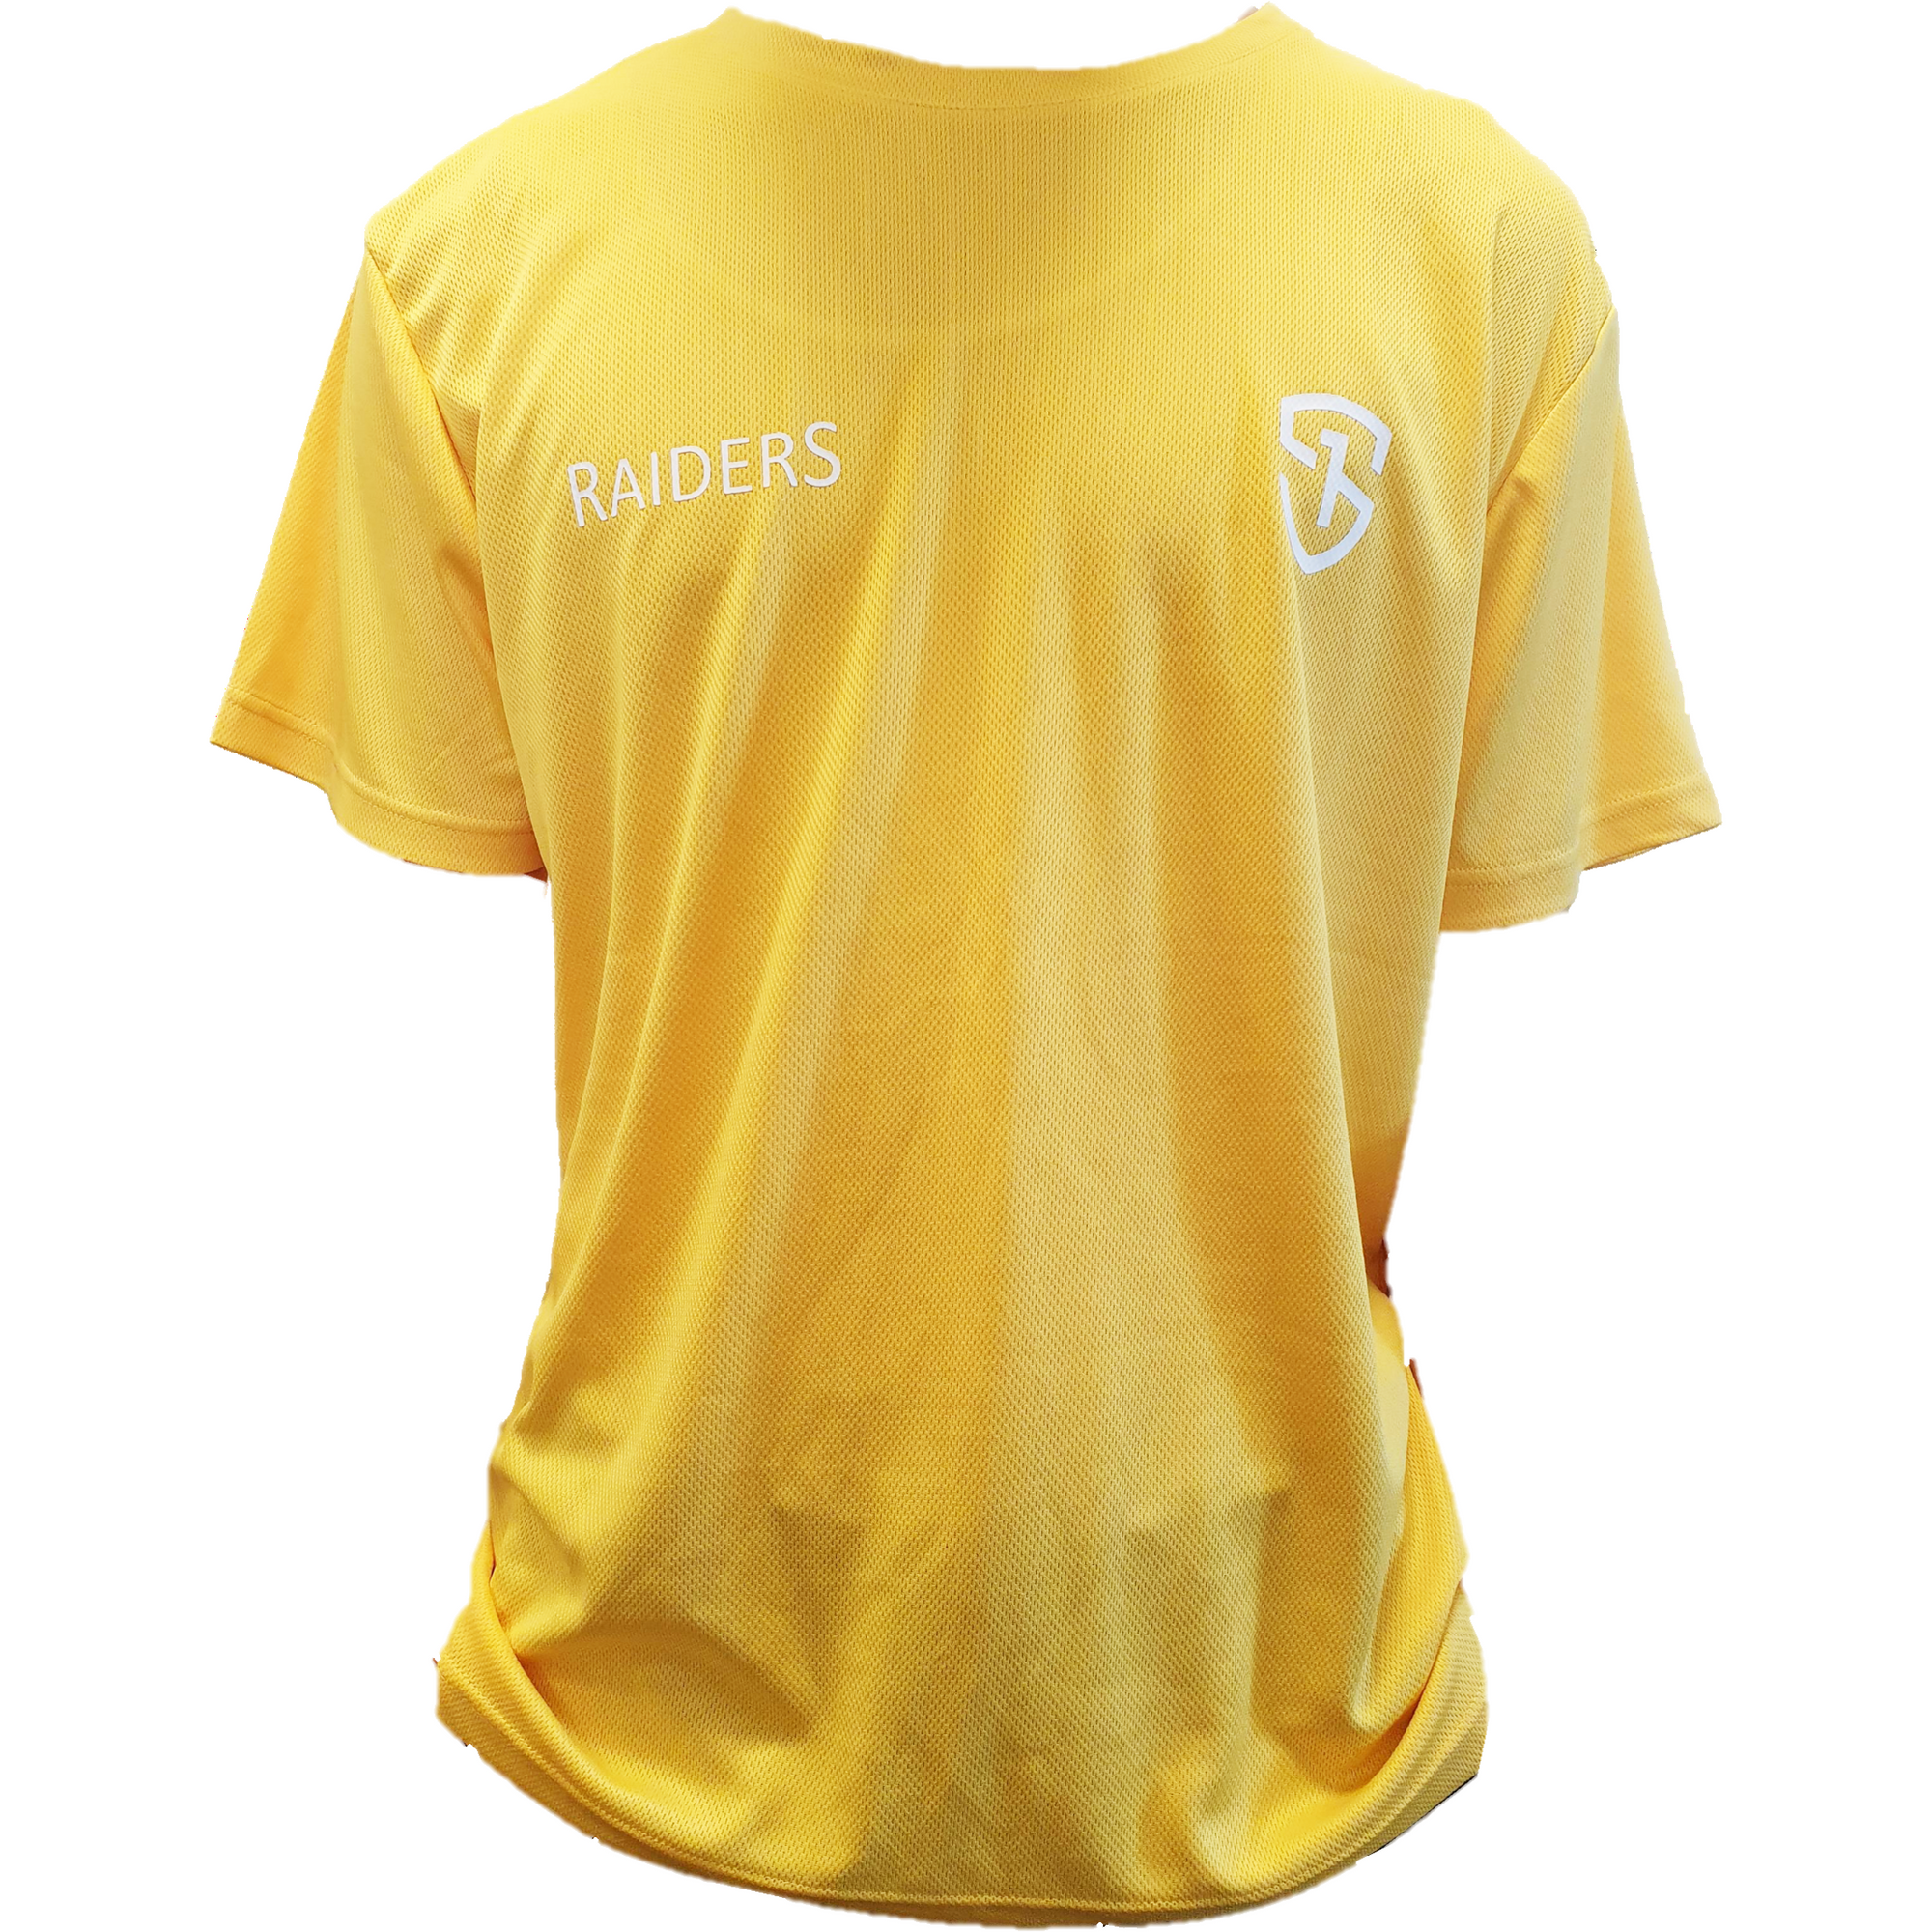 House Team Sports T-shirt Yellow Size 18